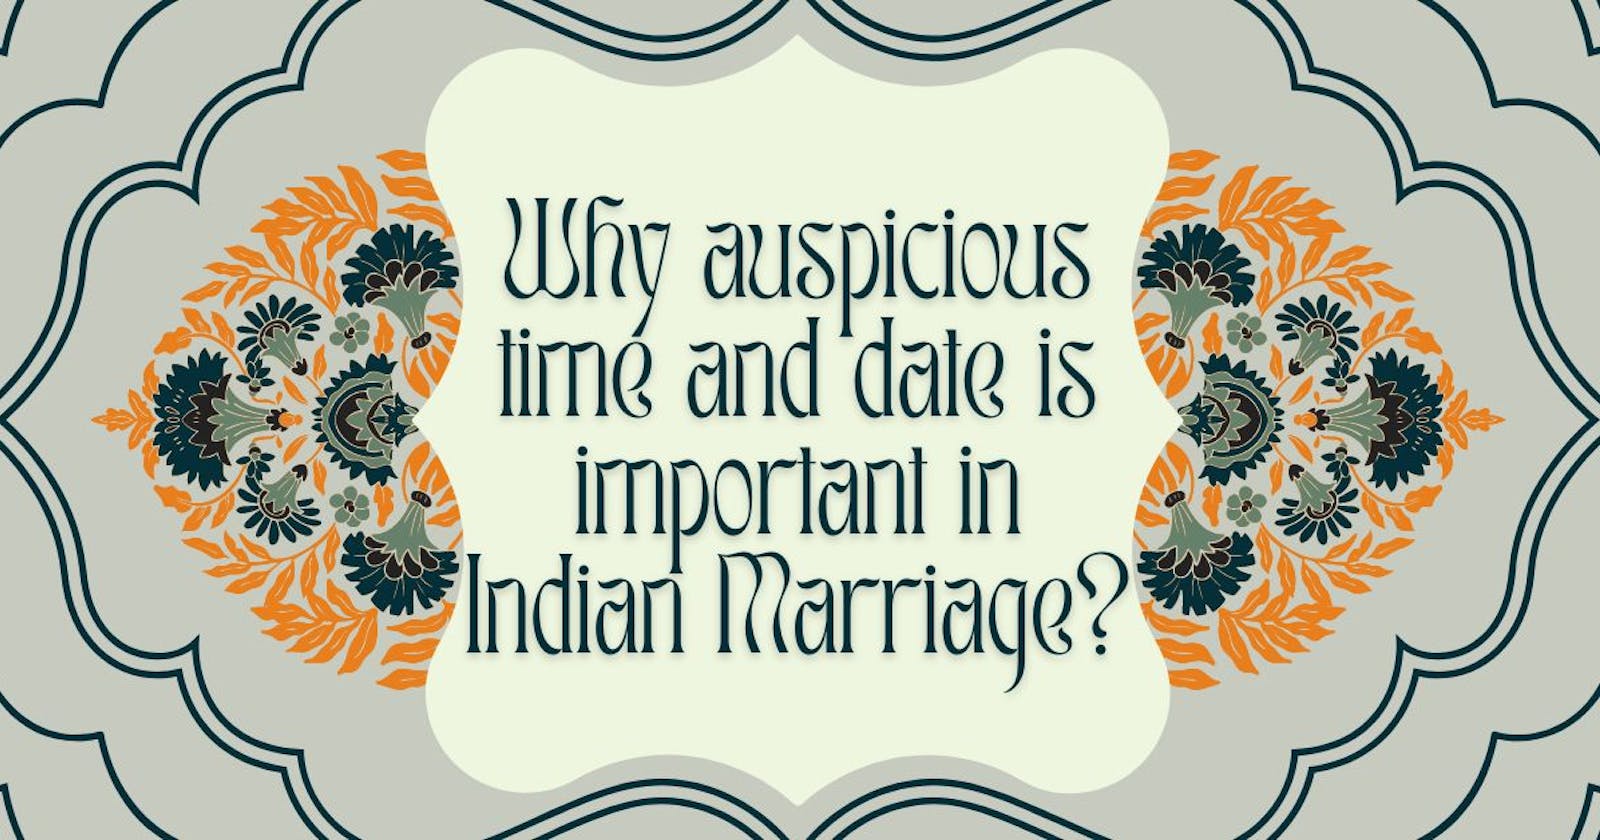 Why auspicious time and date is important in Indian Marriage?